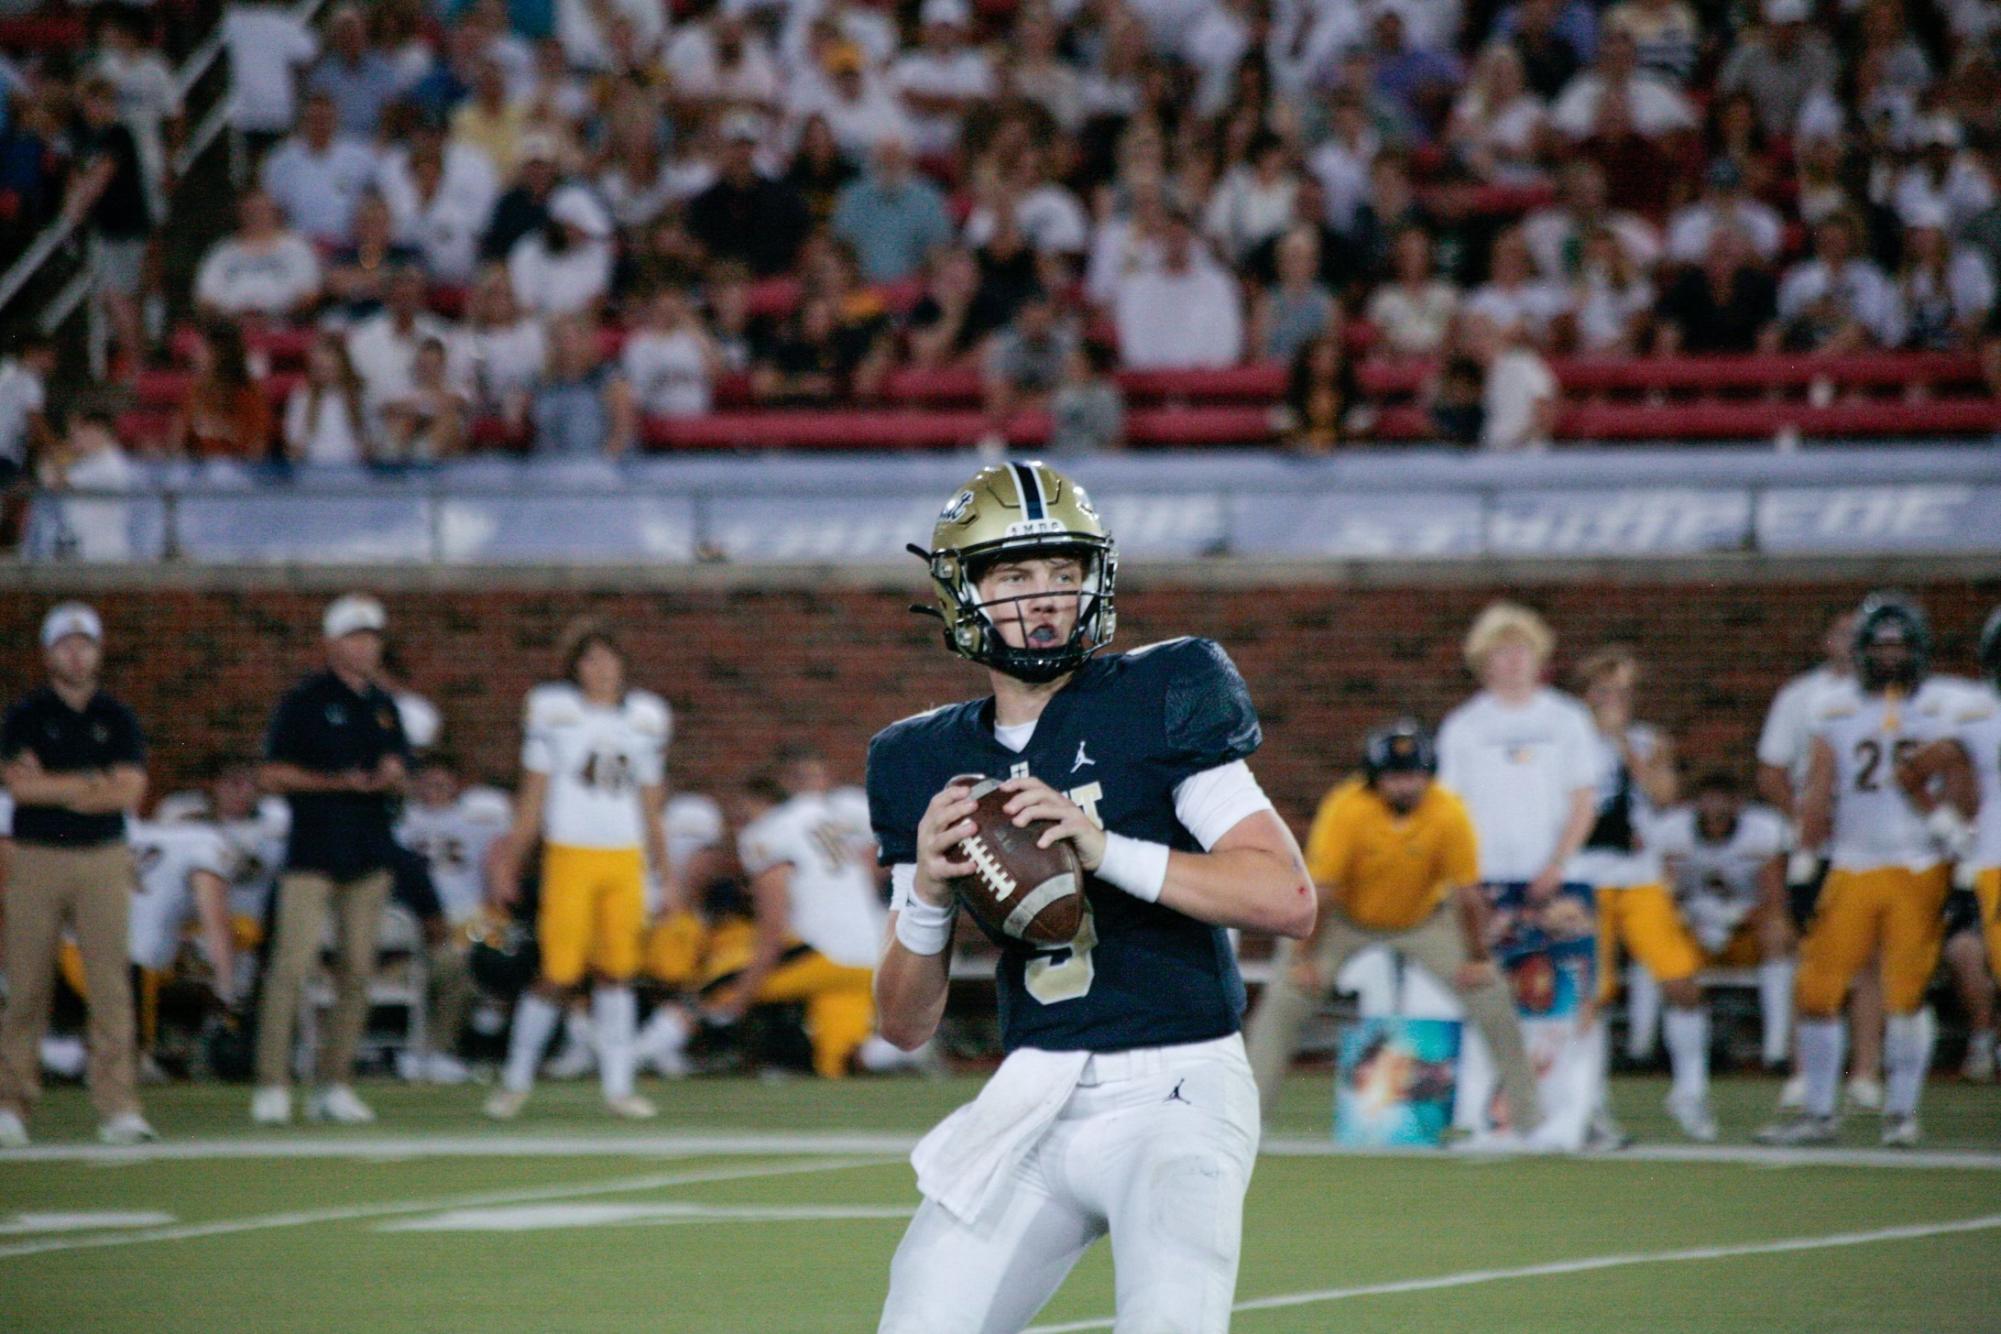 Dallas Jesuit quarterback Charlie Peters looks for an open receiver on Sept. 29 against Highland Park at SMU’s Ford Stadium. The Coppell football team plays the Rangers in the Class 6A Division II Region I area playoffs at Ford Center in Frisco on Thursday at 7 p.m. Photo courtesy Jaxx Rigelsky.